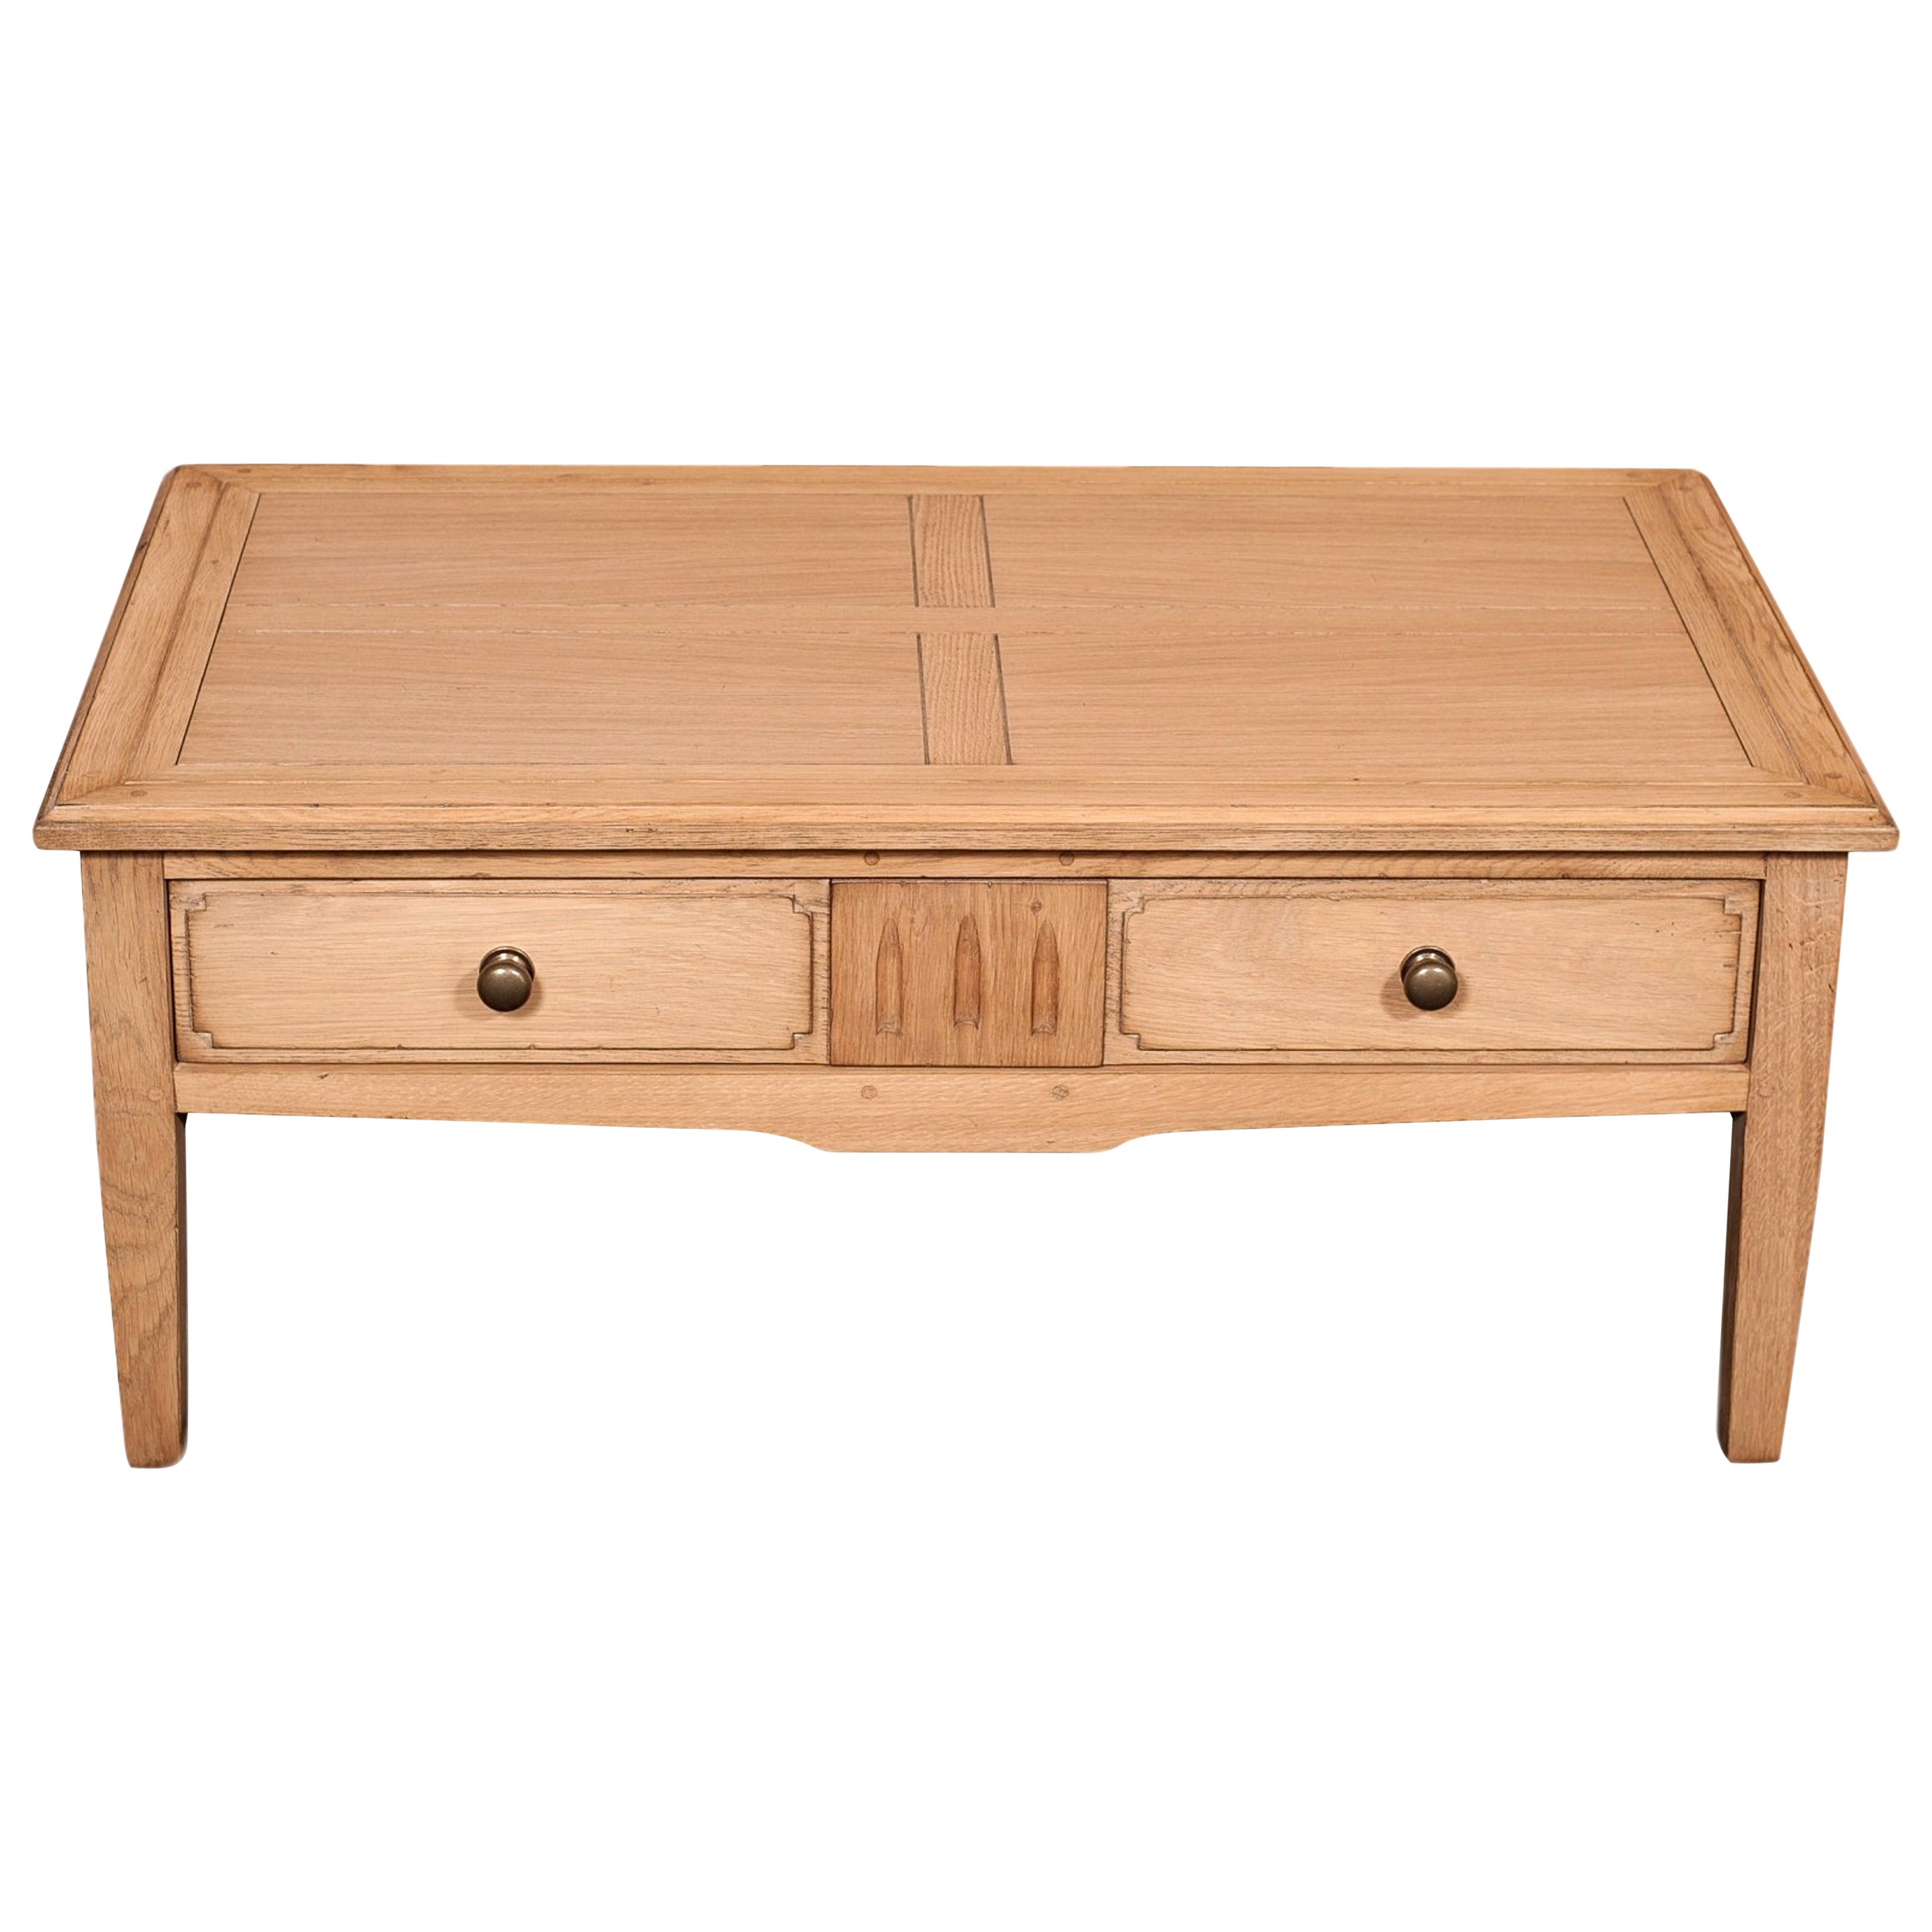 French Directoire Oak Coffee Table, Countryside Style Finish, Drawer